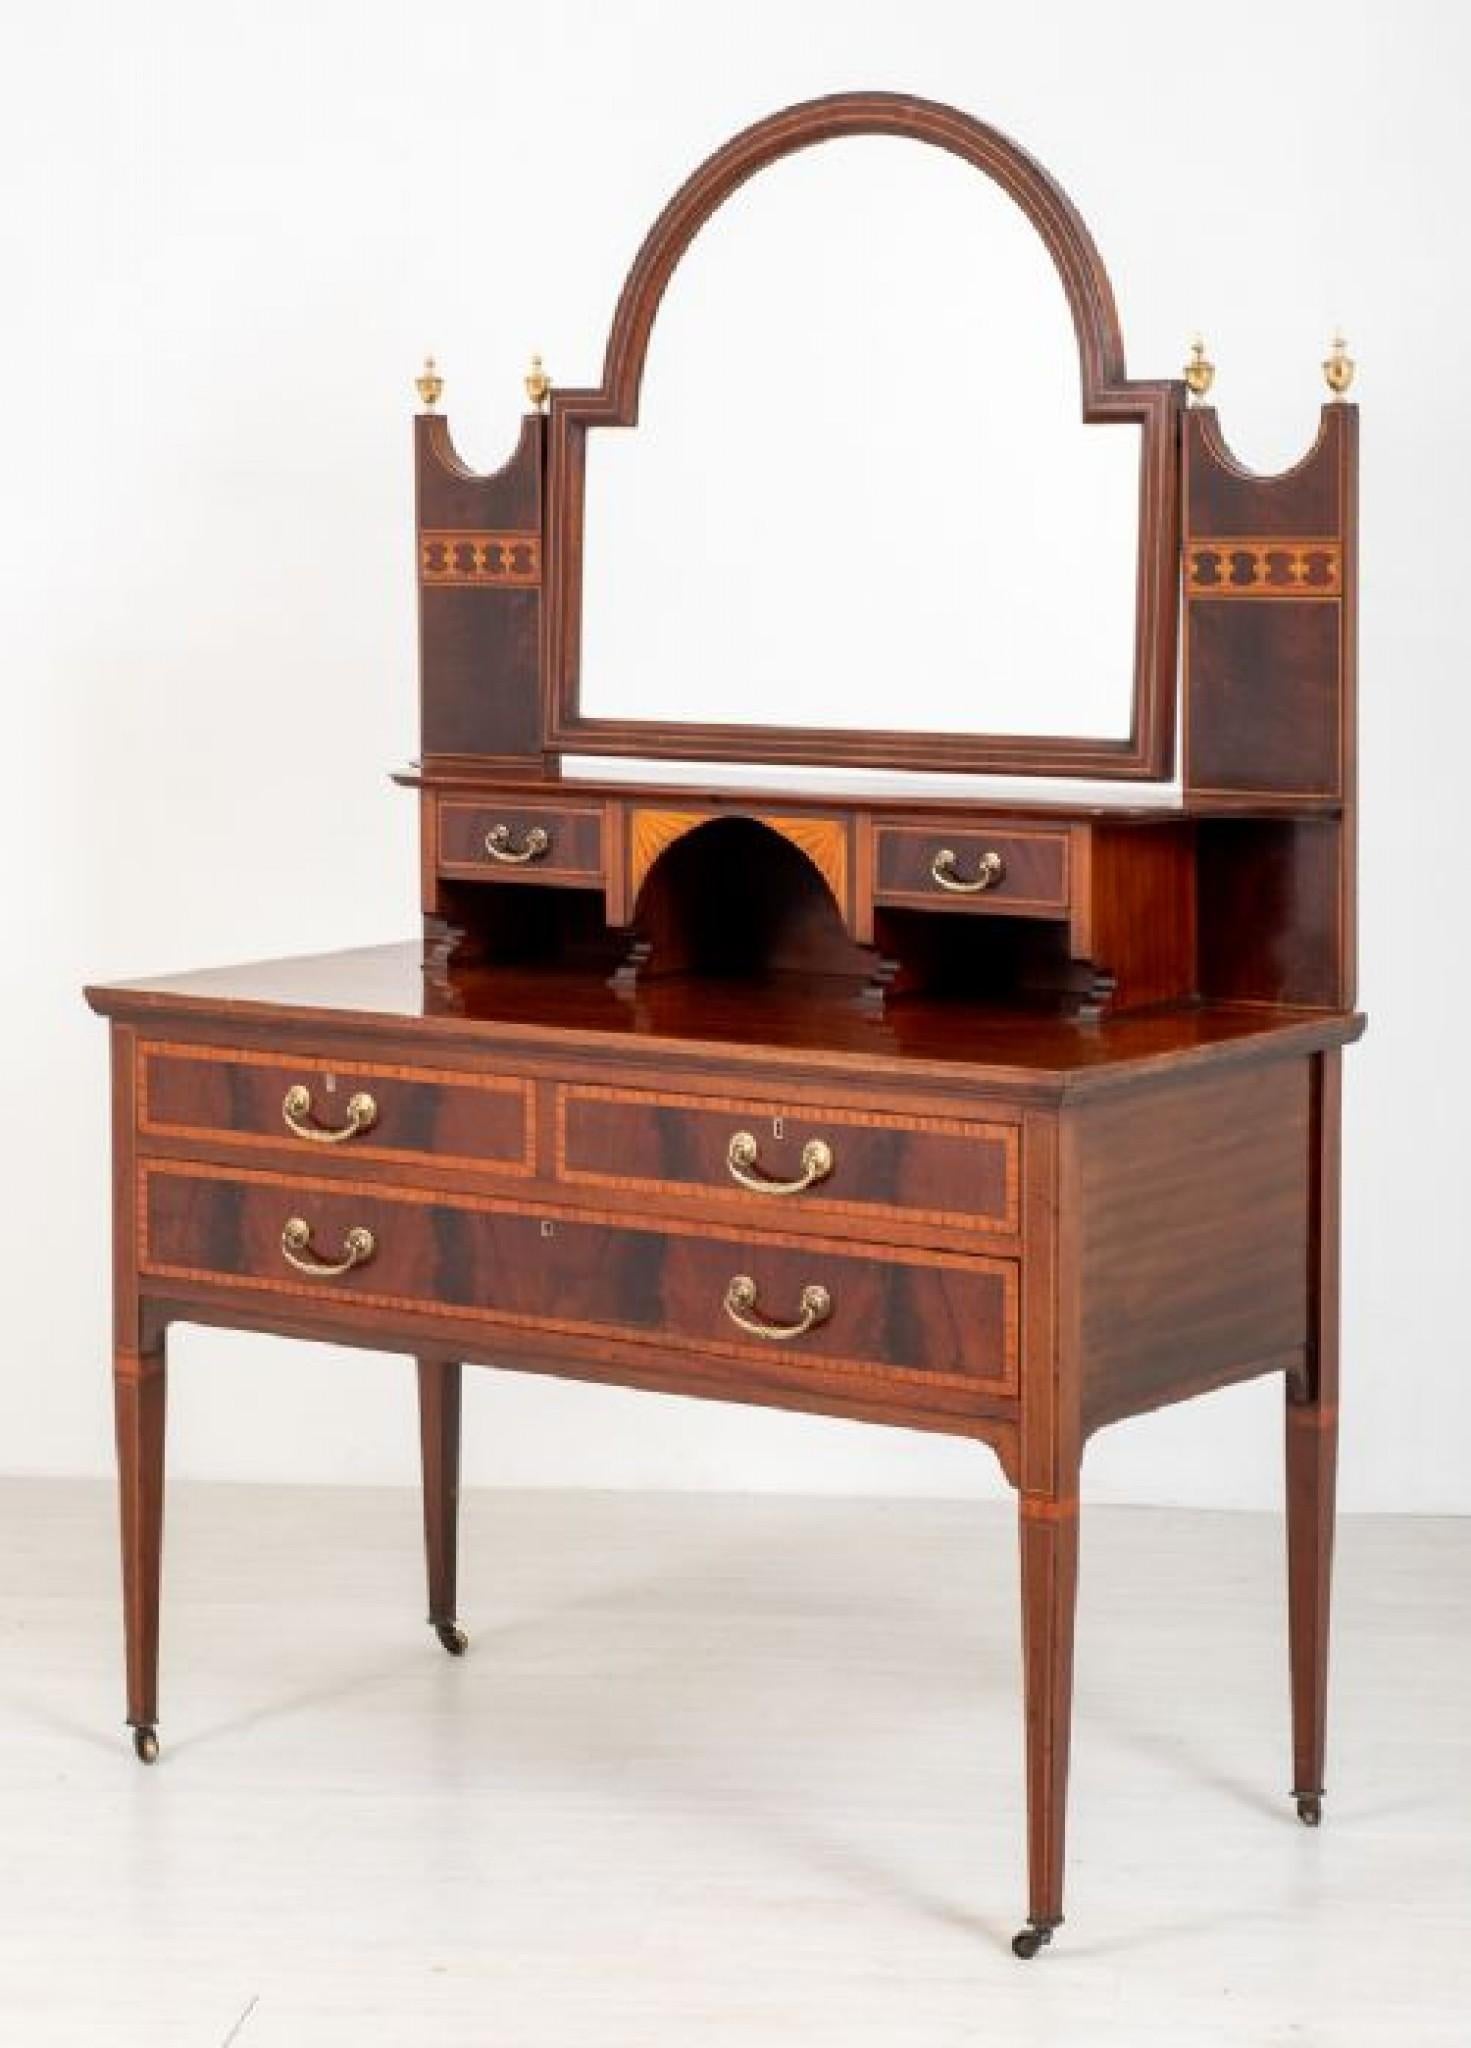 This excellent quality Sheraton Revival mahogany dressing table stands upon elegant tapered legs with original brass castors.
circa 1890
Having an arrangement of 2 over 1 mahogany lined drawers (note the fine dove tails)
The drawer fronts having